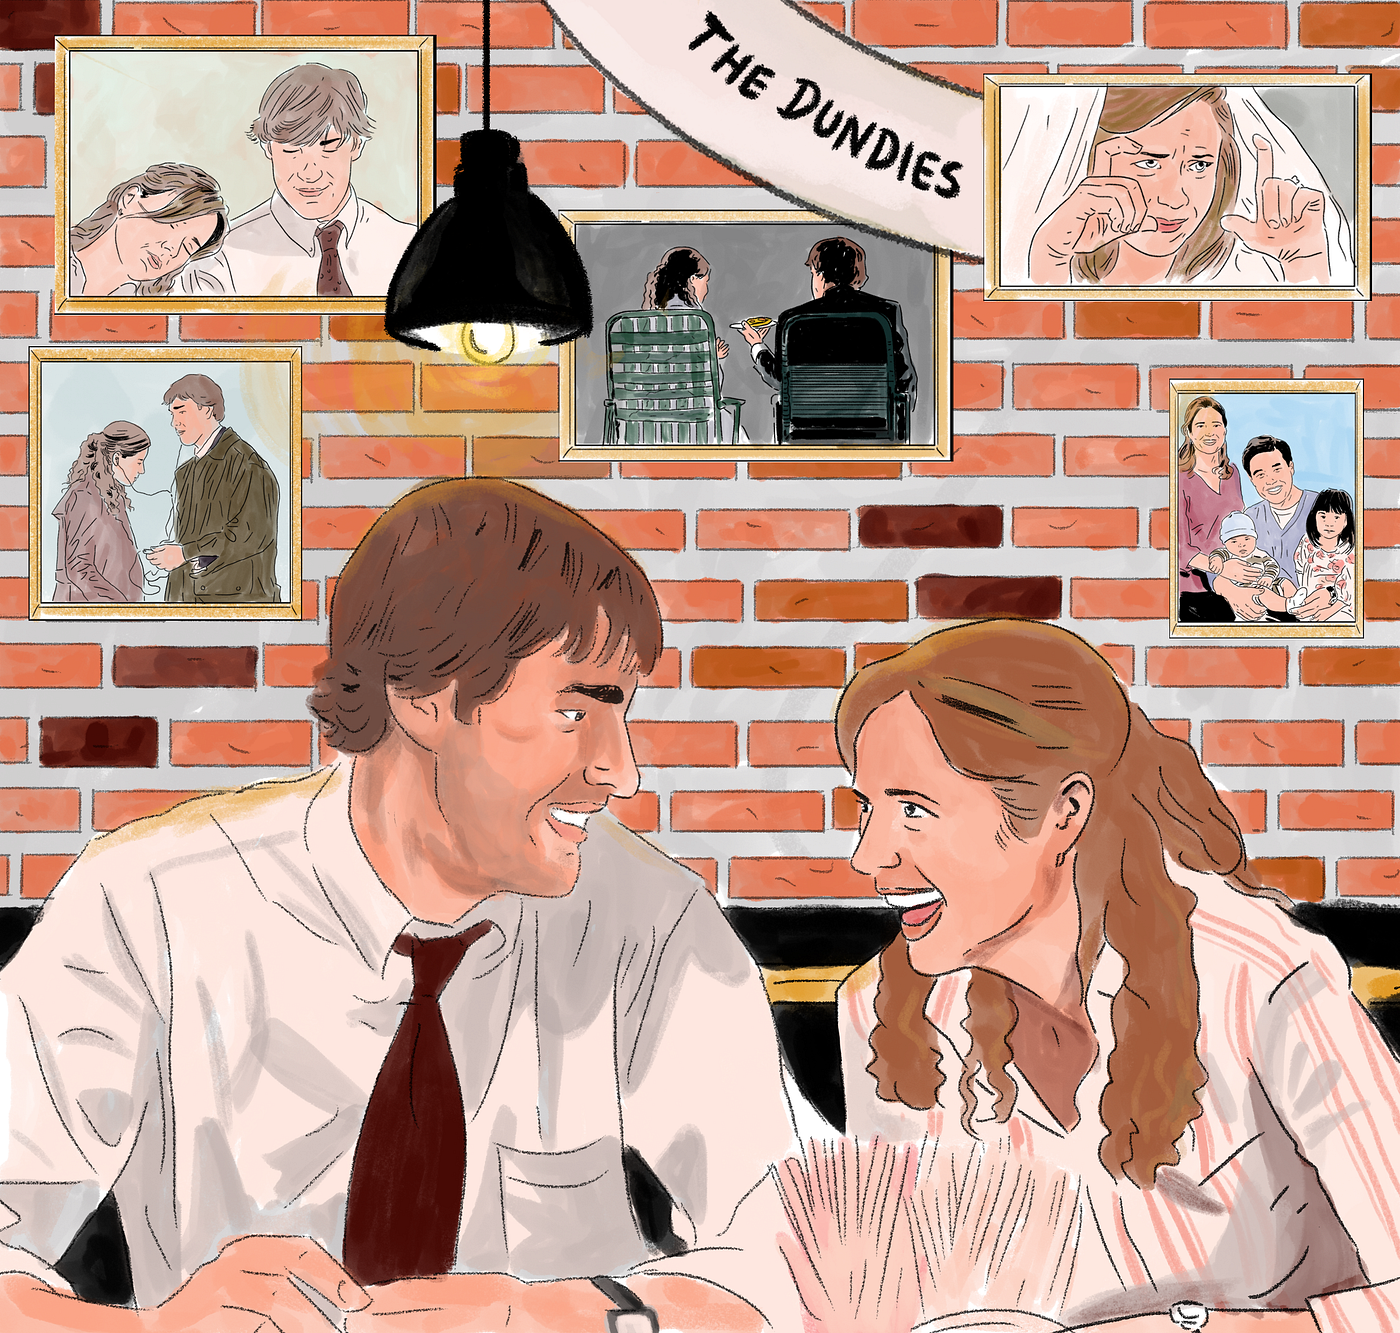 UNBOXING] #1, Box “Jim and Pam” — The Office, by Projeto Fan Service